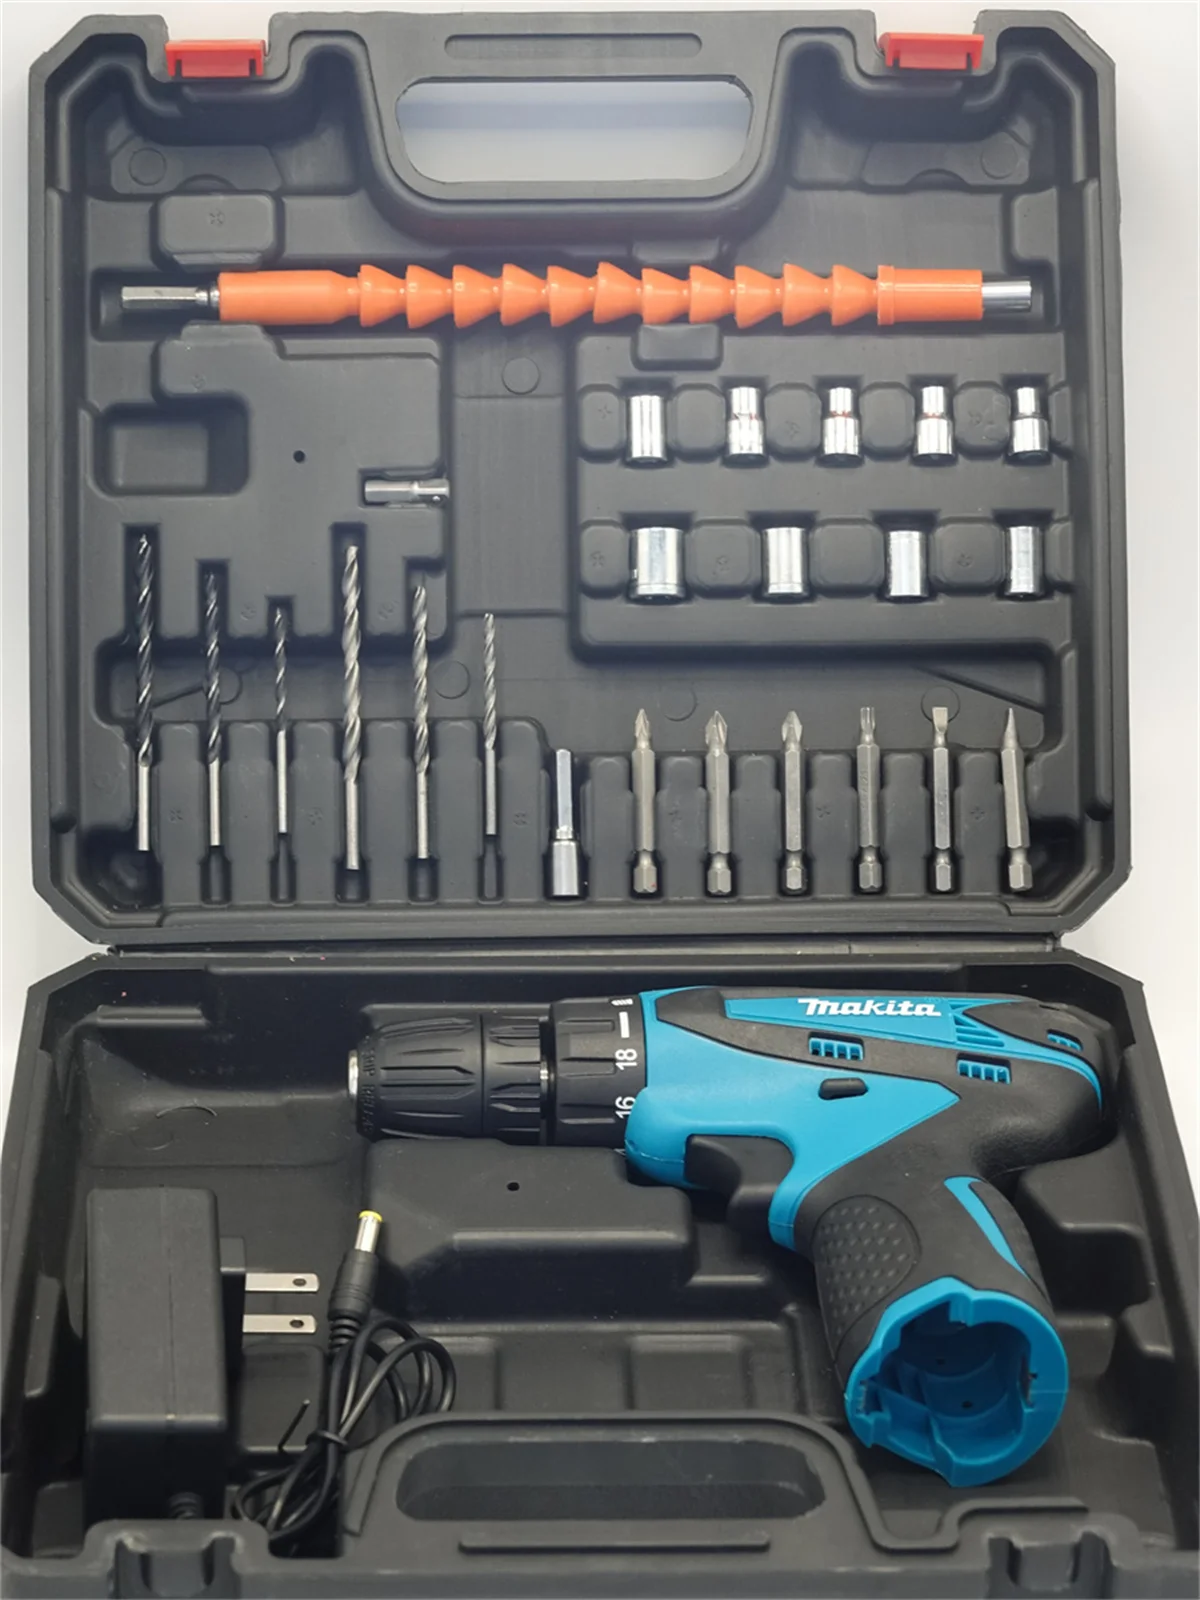 Makita Tool Suit Handheld Cordless Driver Drill 12V Electric Screwdriver Two Speed Adjustable Lithium Battery Drill No battery